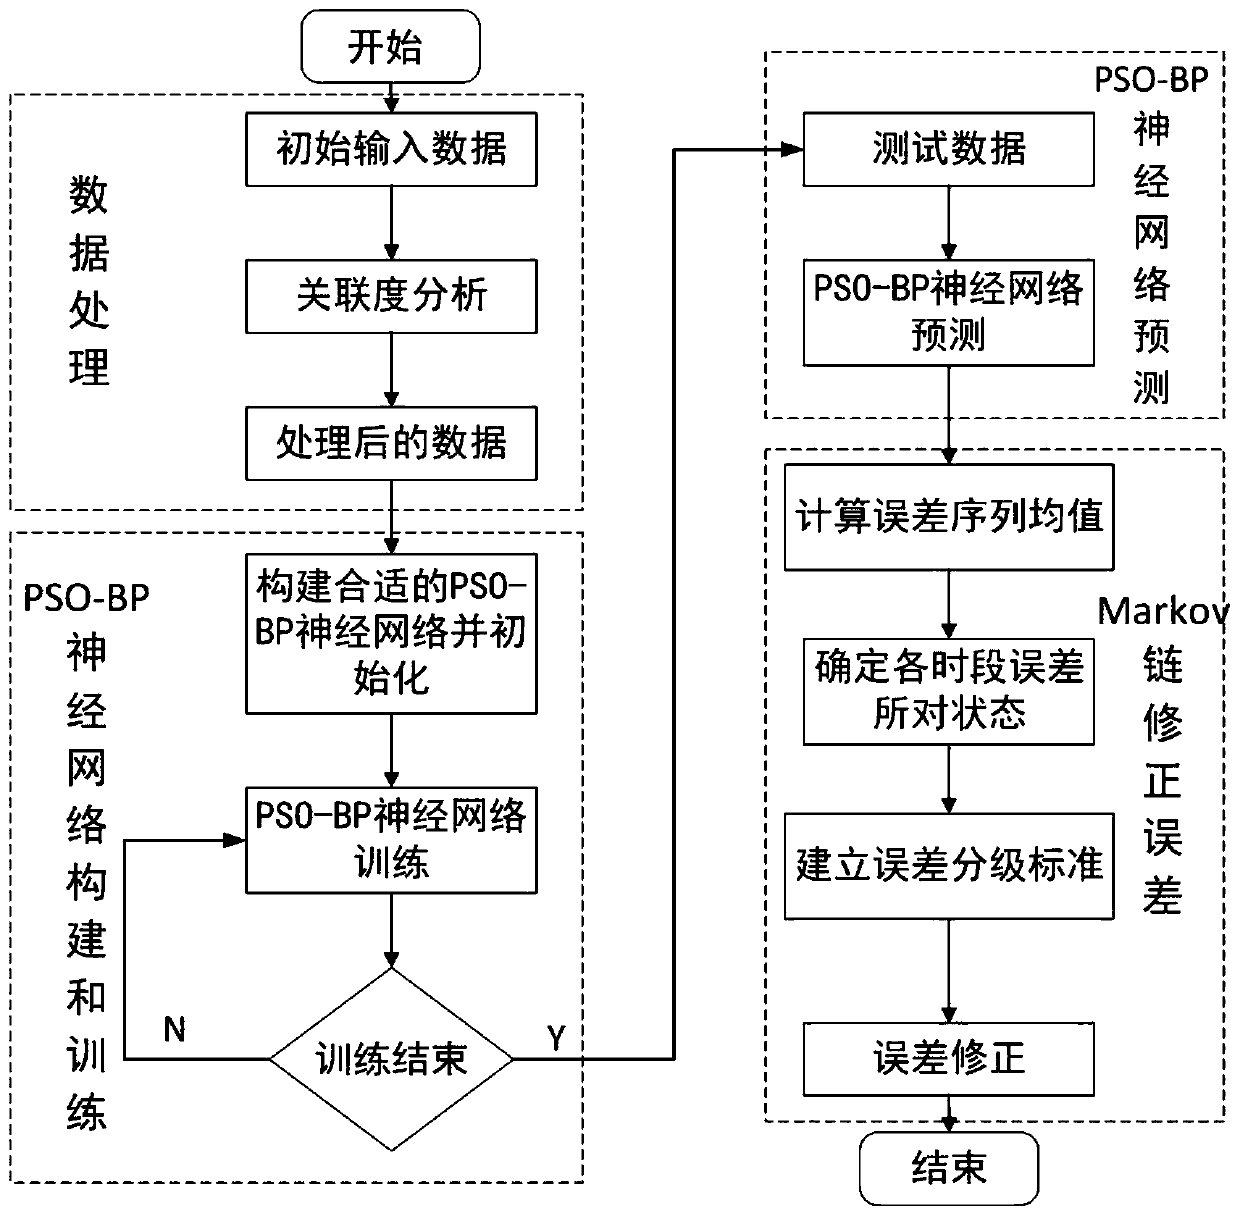 Air conditioner cold load dynamic prediction method based on combination of PSO-BP and Markov chain